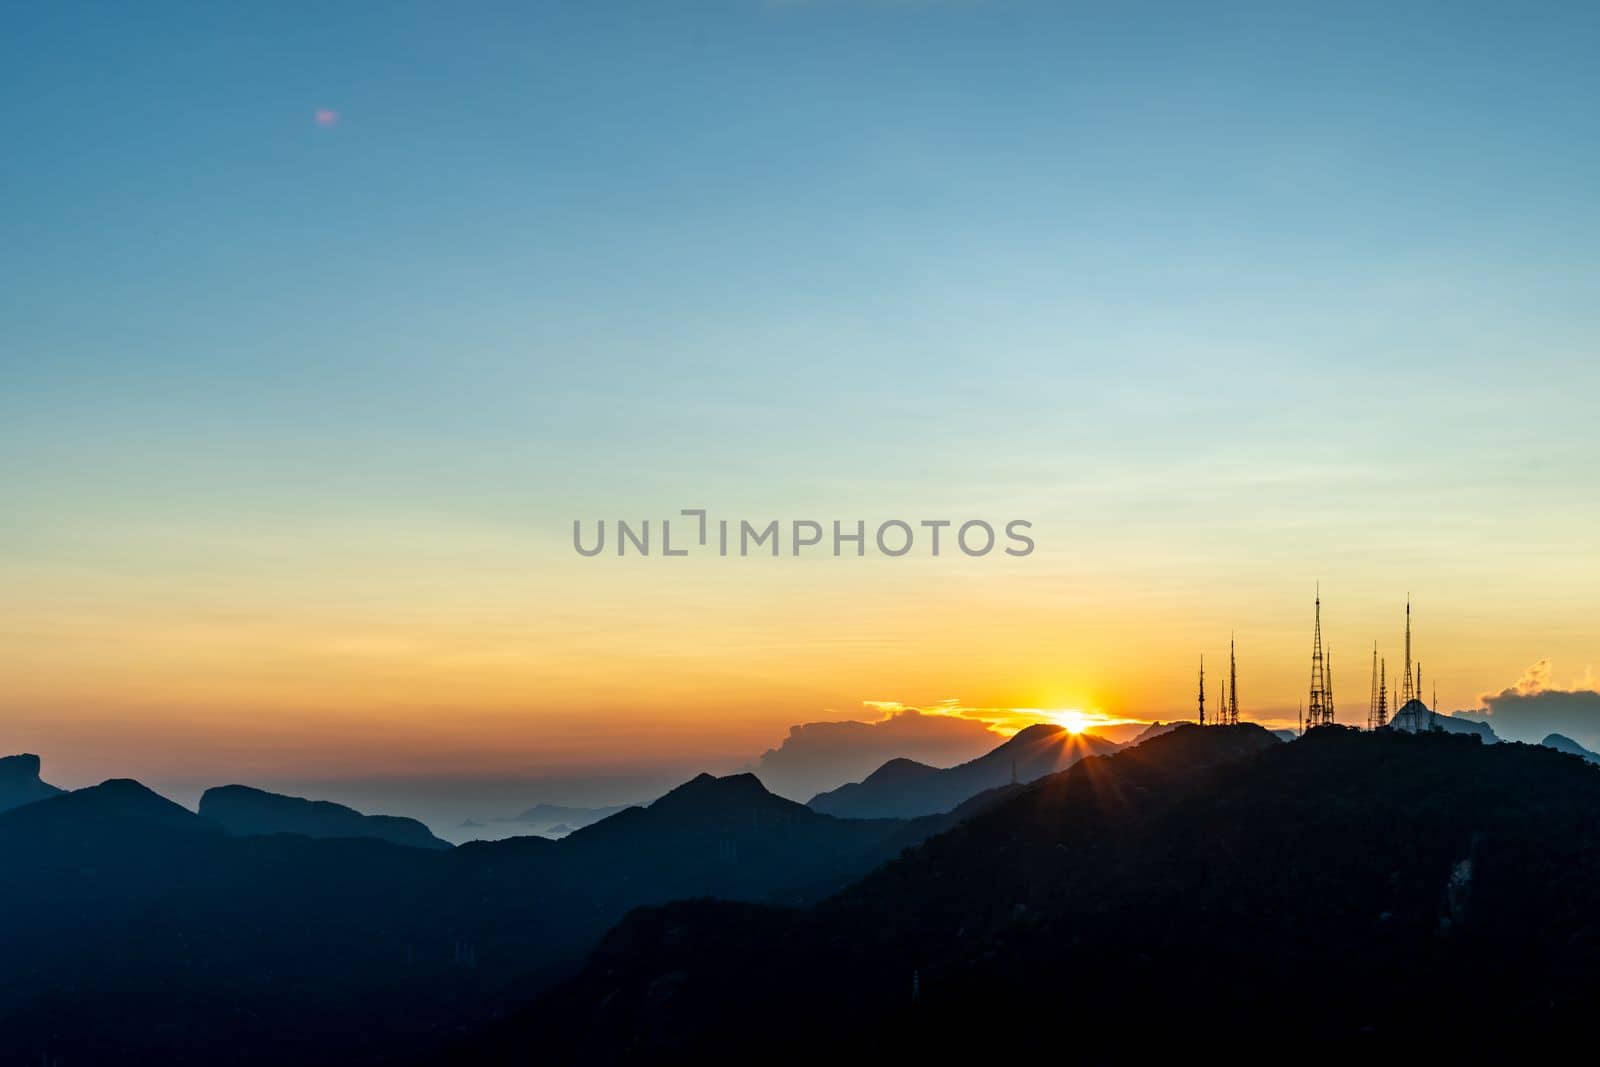 sunset over the transmission towers in rio de janeiro, view from the statue of christ by Edophoto